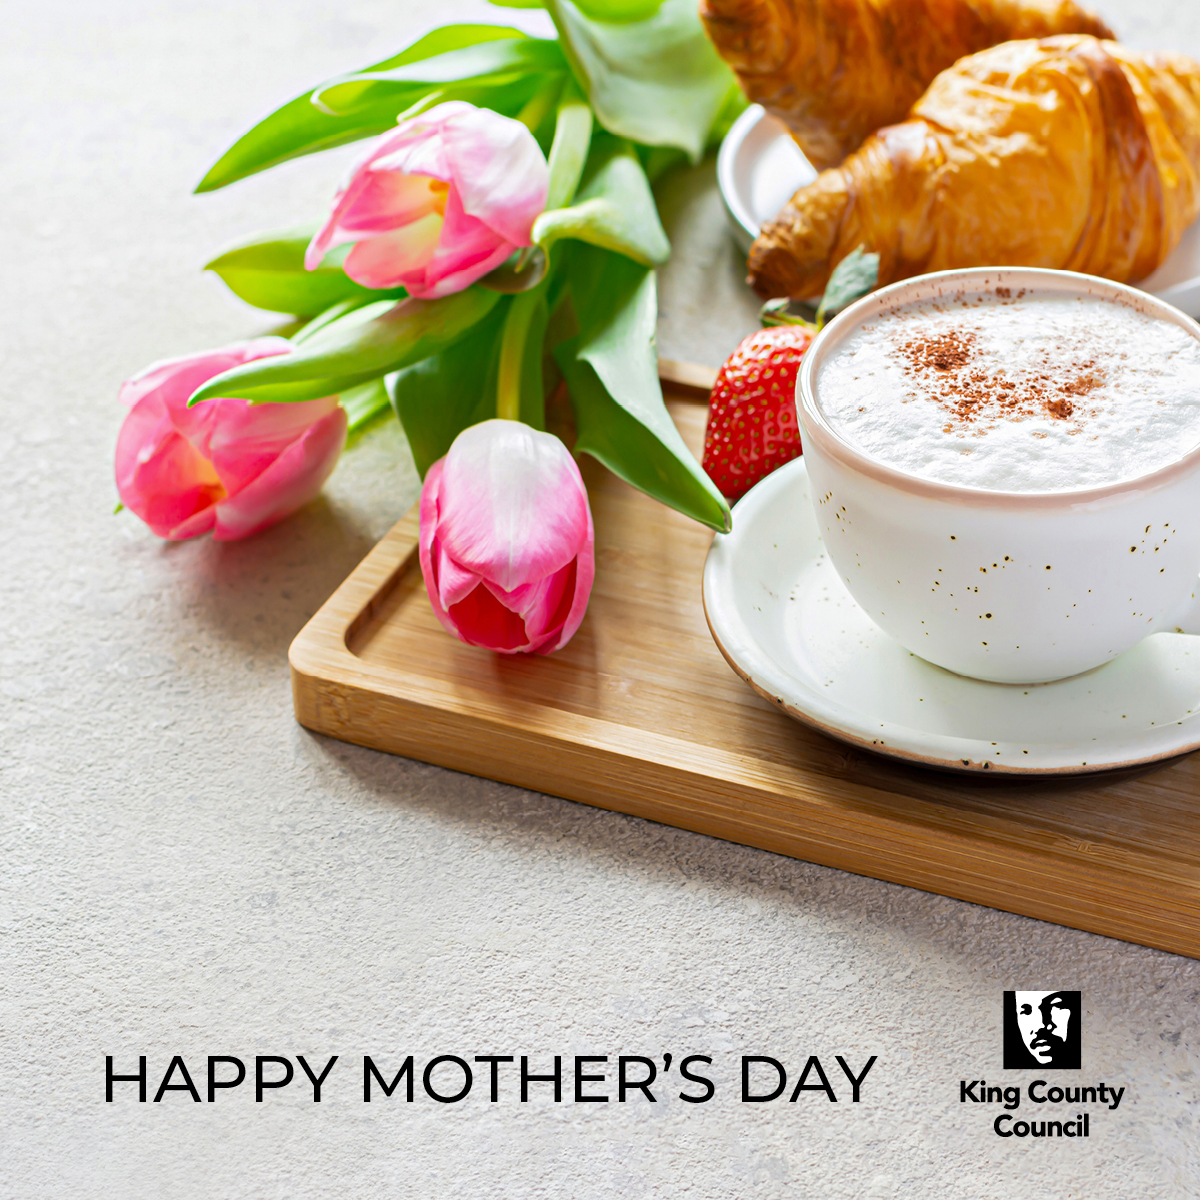 Wishing a special Mother’s Day to all across King County! 🌷